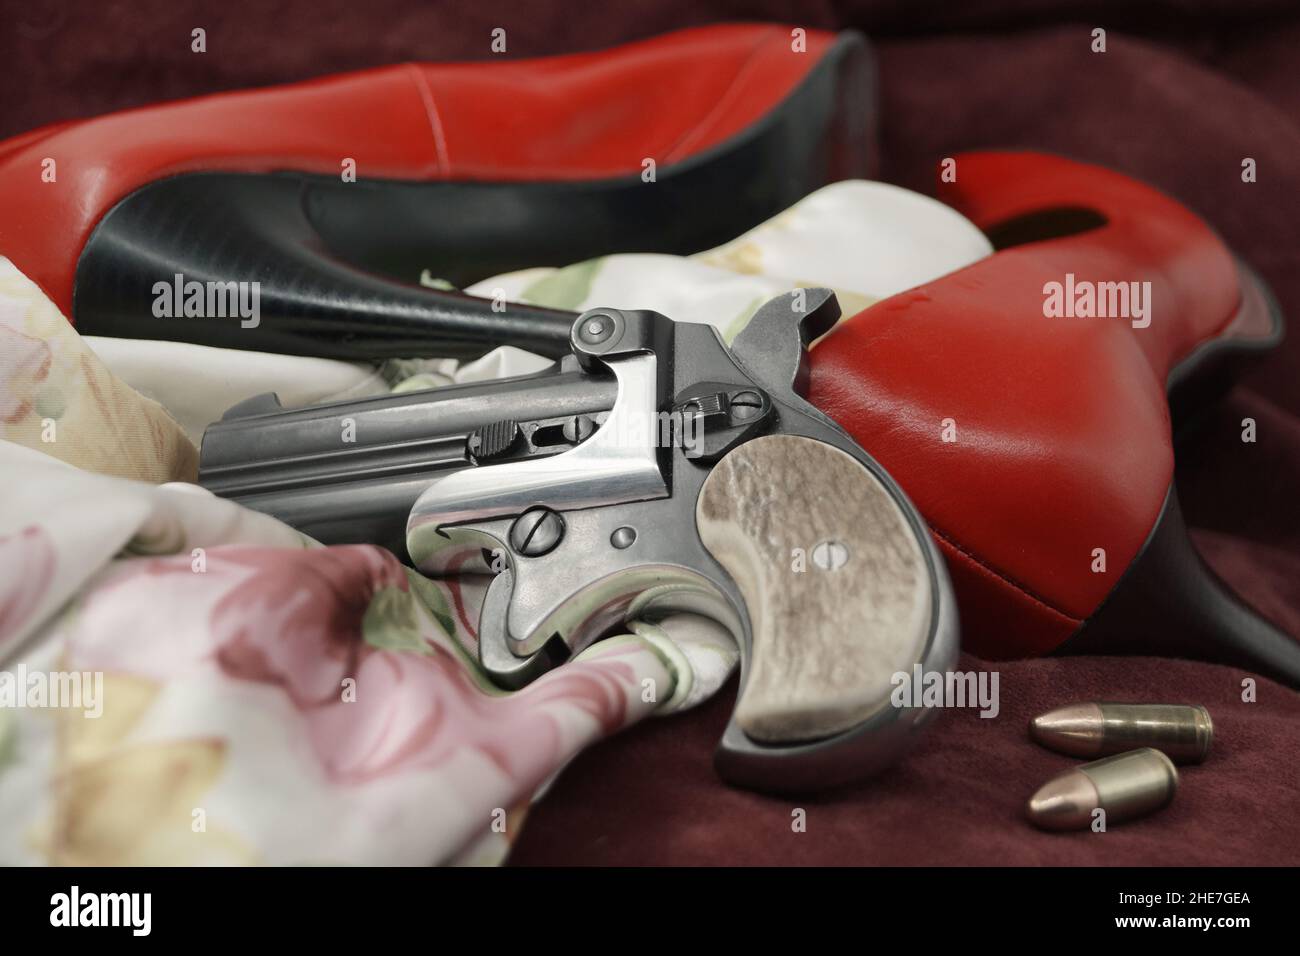 The end of an affair. A handgun, bullets, red high heels and nightie on dark red velvet. Stock Photo